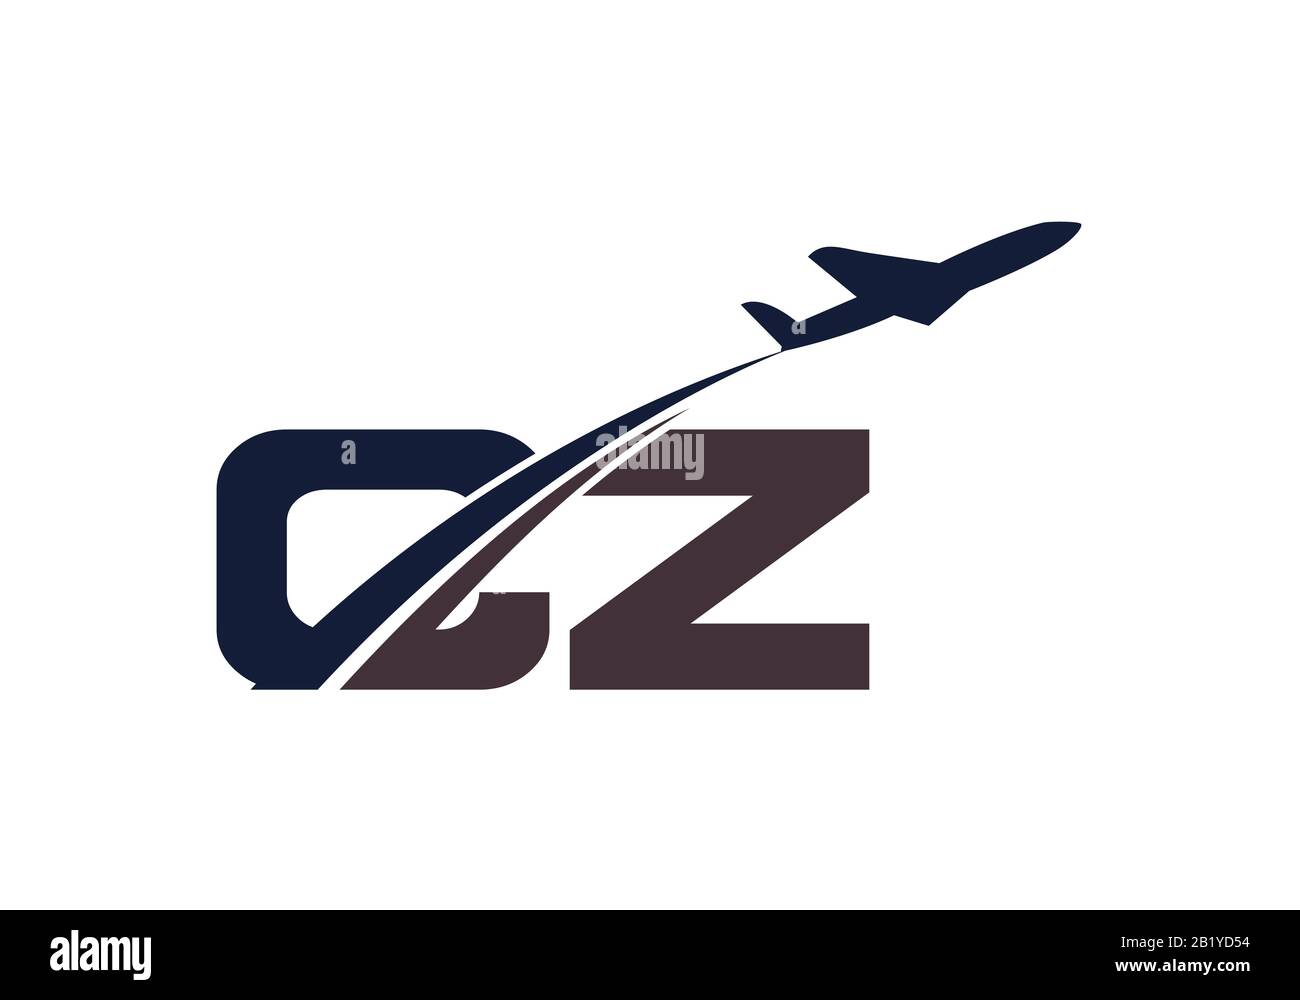 Initial Letter C and  Z with Aviation Logo Design, Air, Airline, Airplane and Travel Logo template. Stock Vector